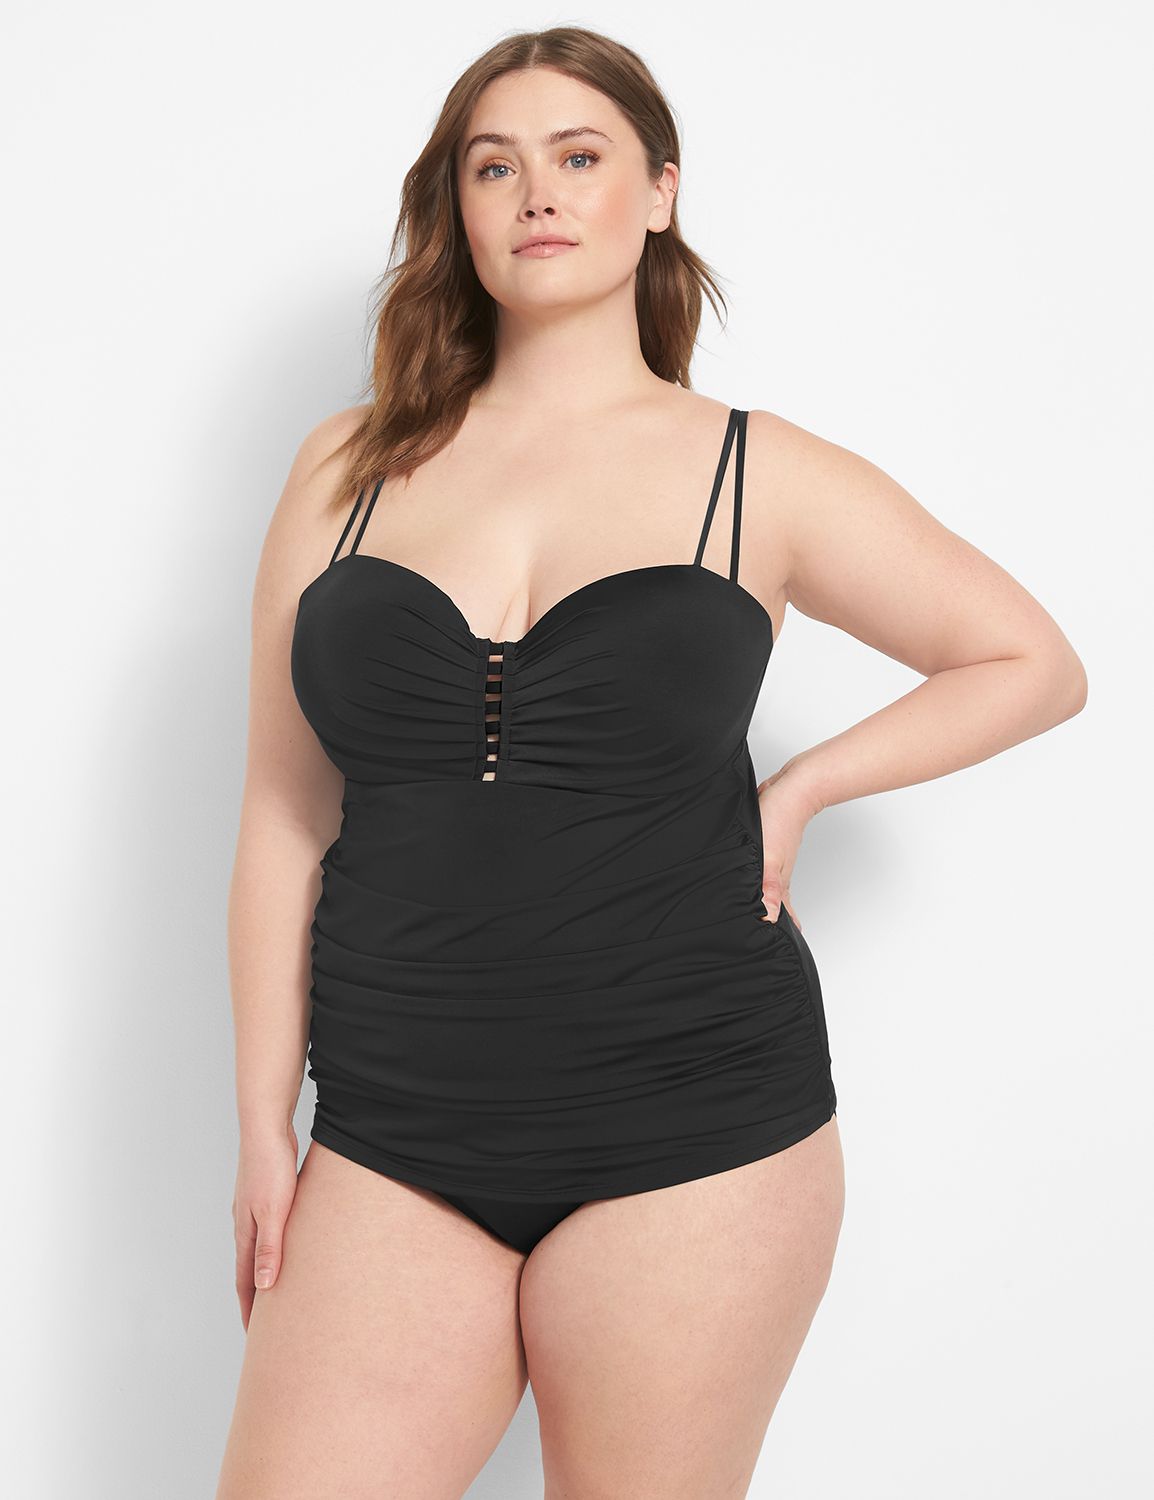 NWT CACIQUE collection by Lane Bryant tankini w/corseted waistline